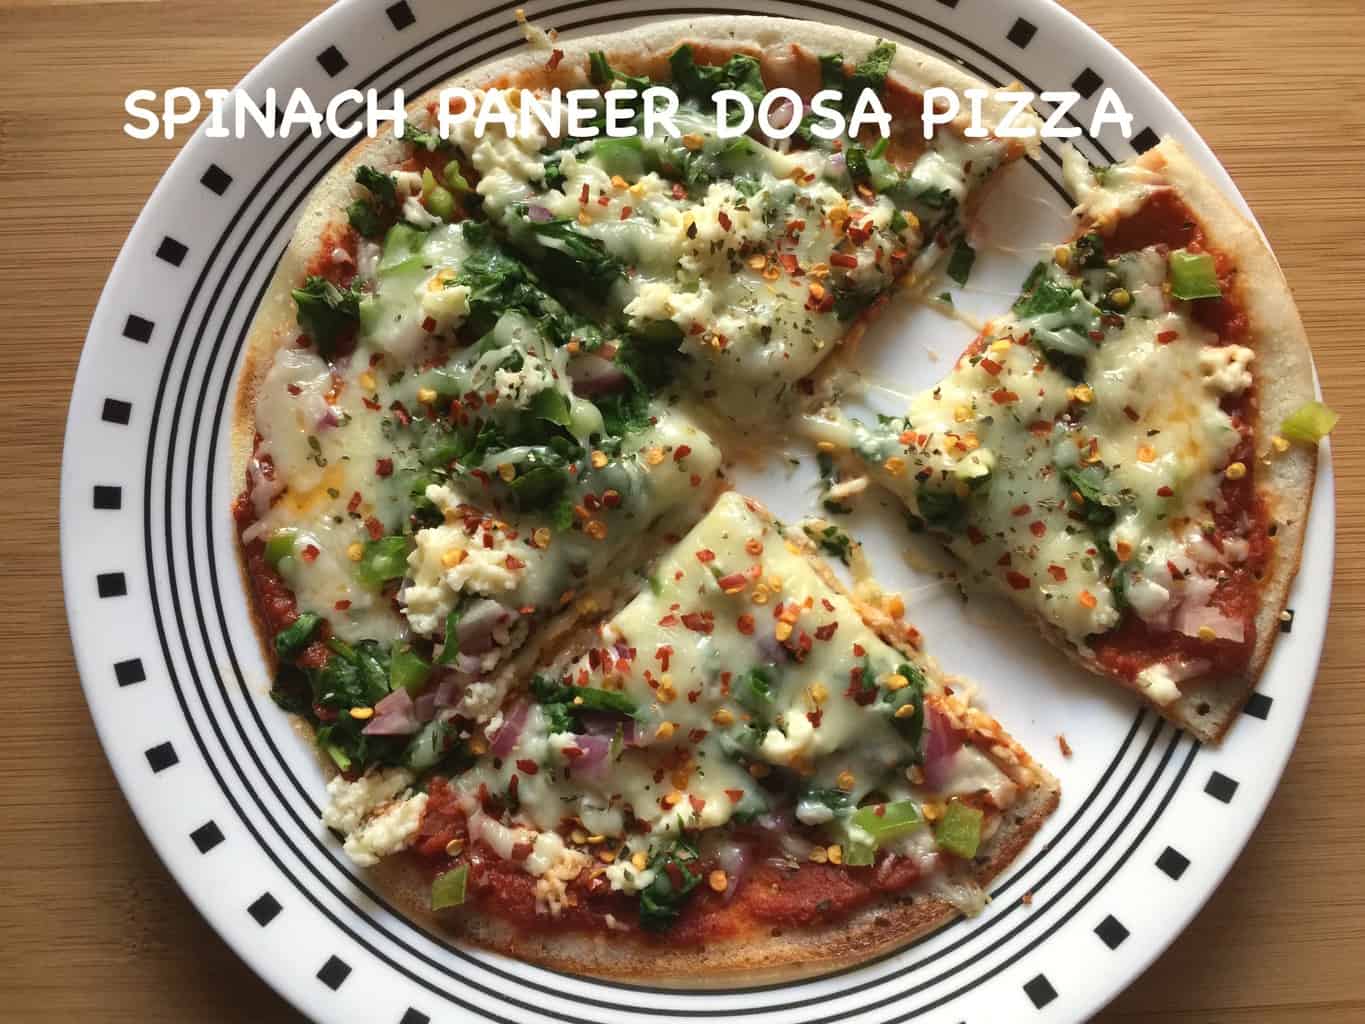 Spinach Paneer Dosa Pizza served on a plate